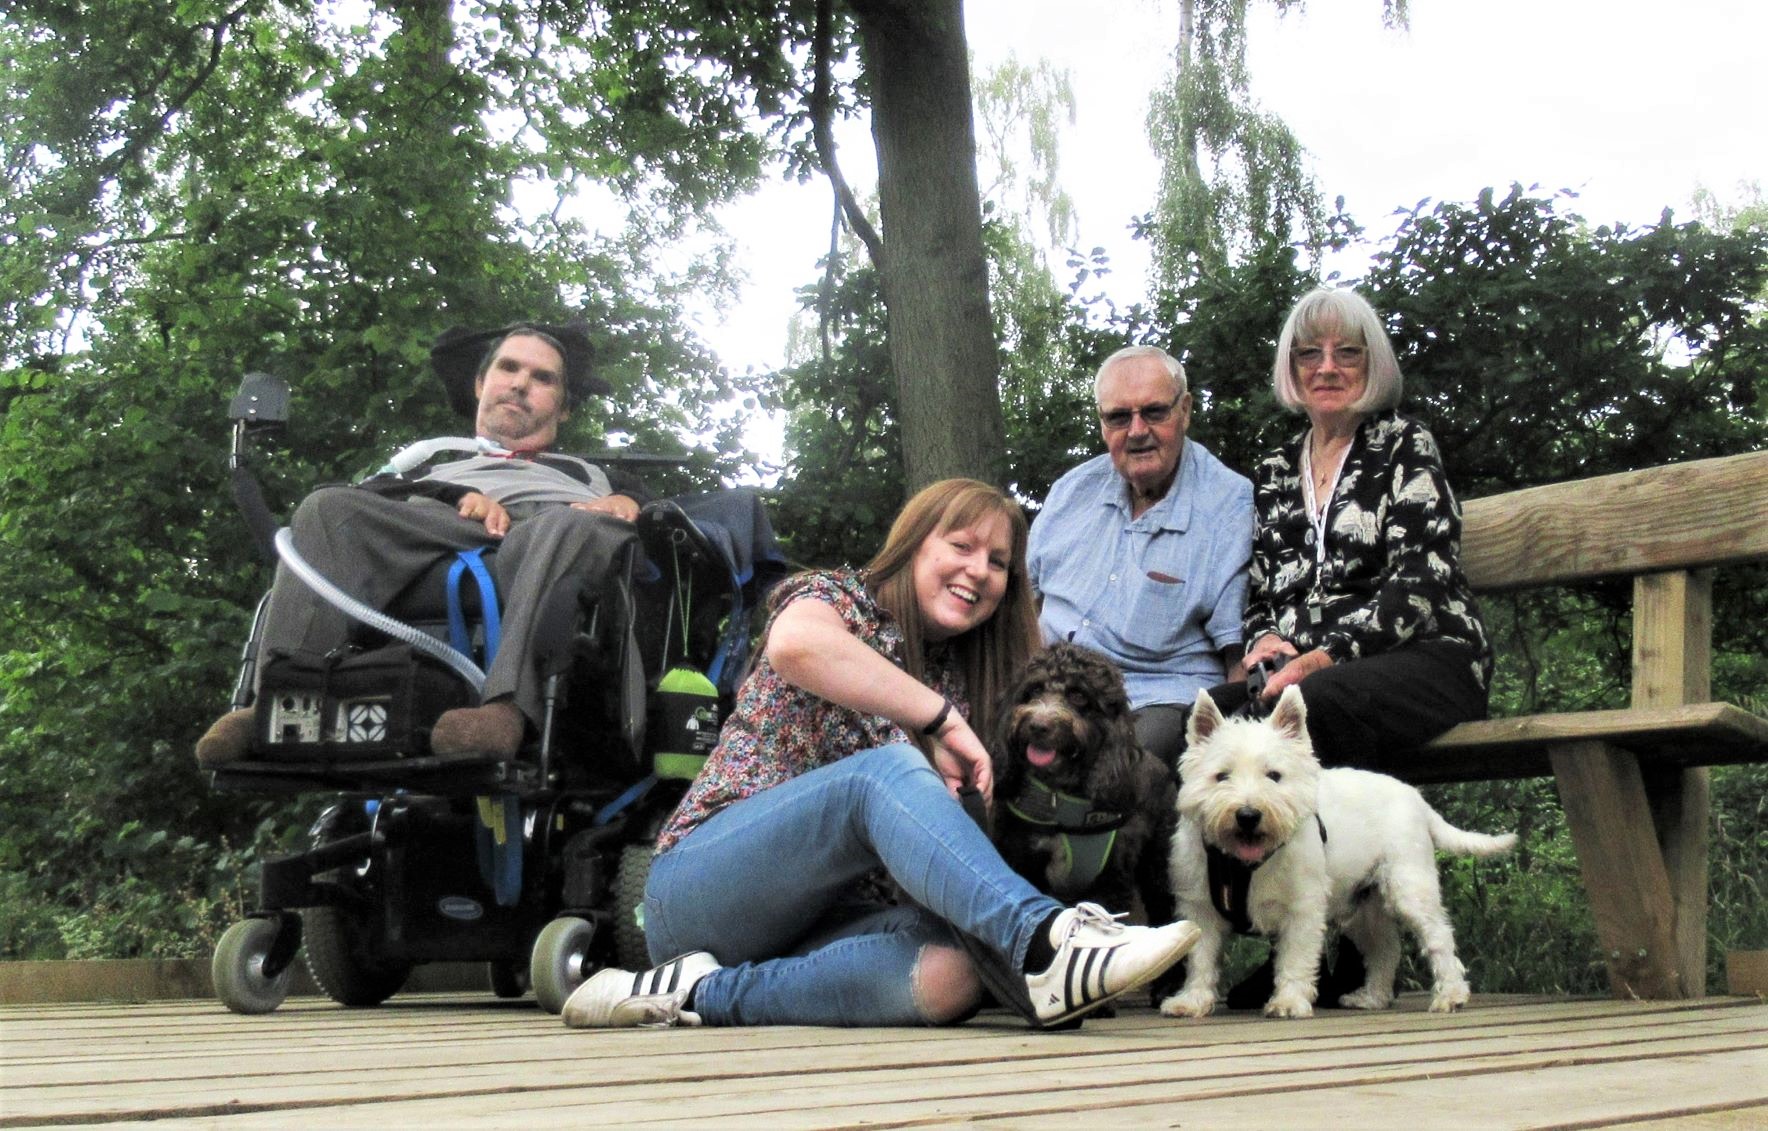 Wheelchair user Paul with his family and dogs on the boardwalk on accessible trail 